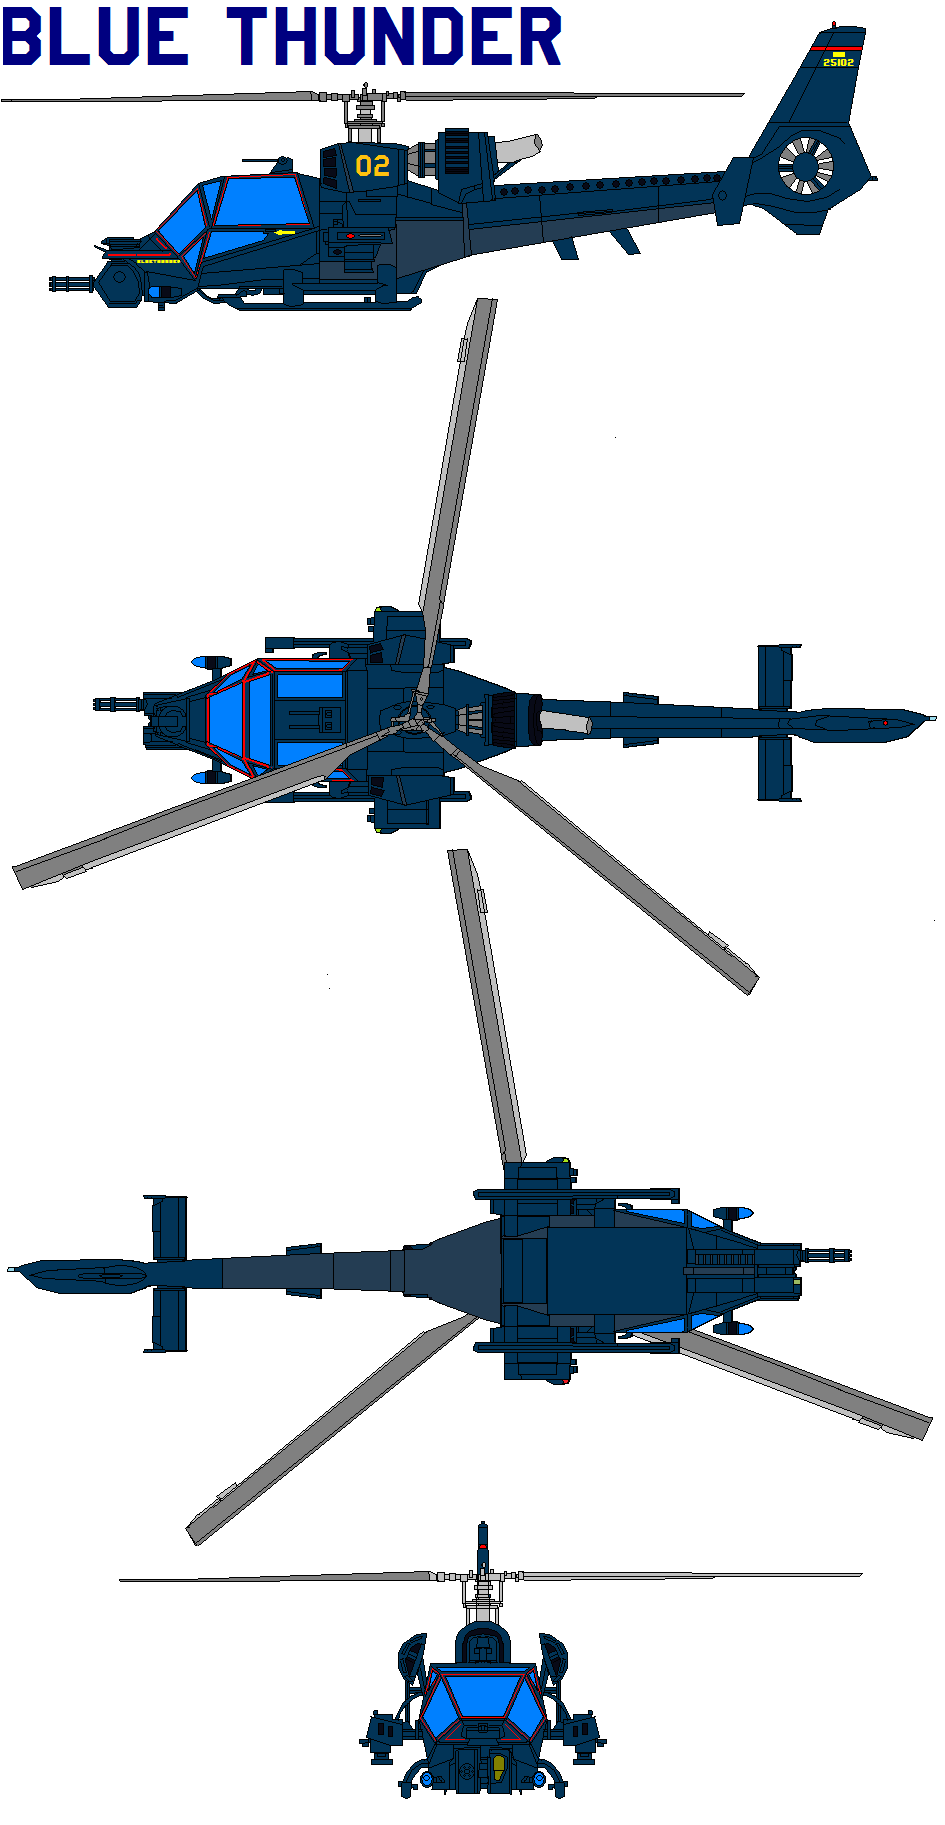 Drawings Movies Tv Blue Thunder Helicopter A Mock Up Of